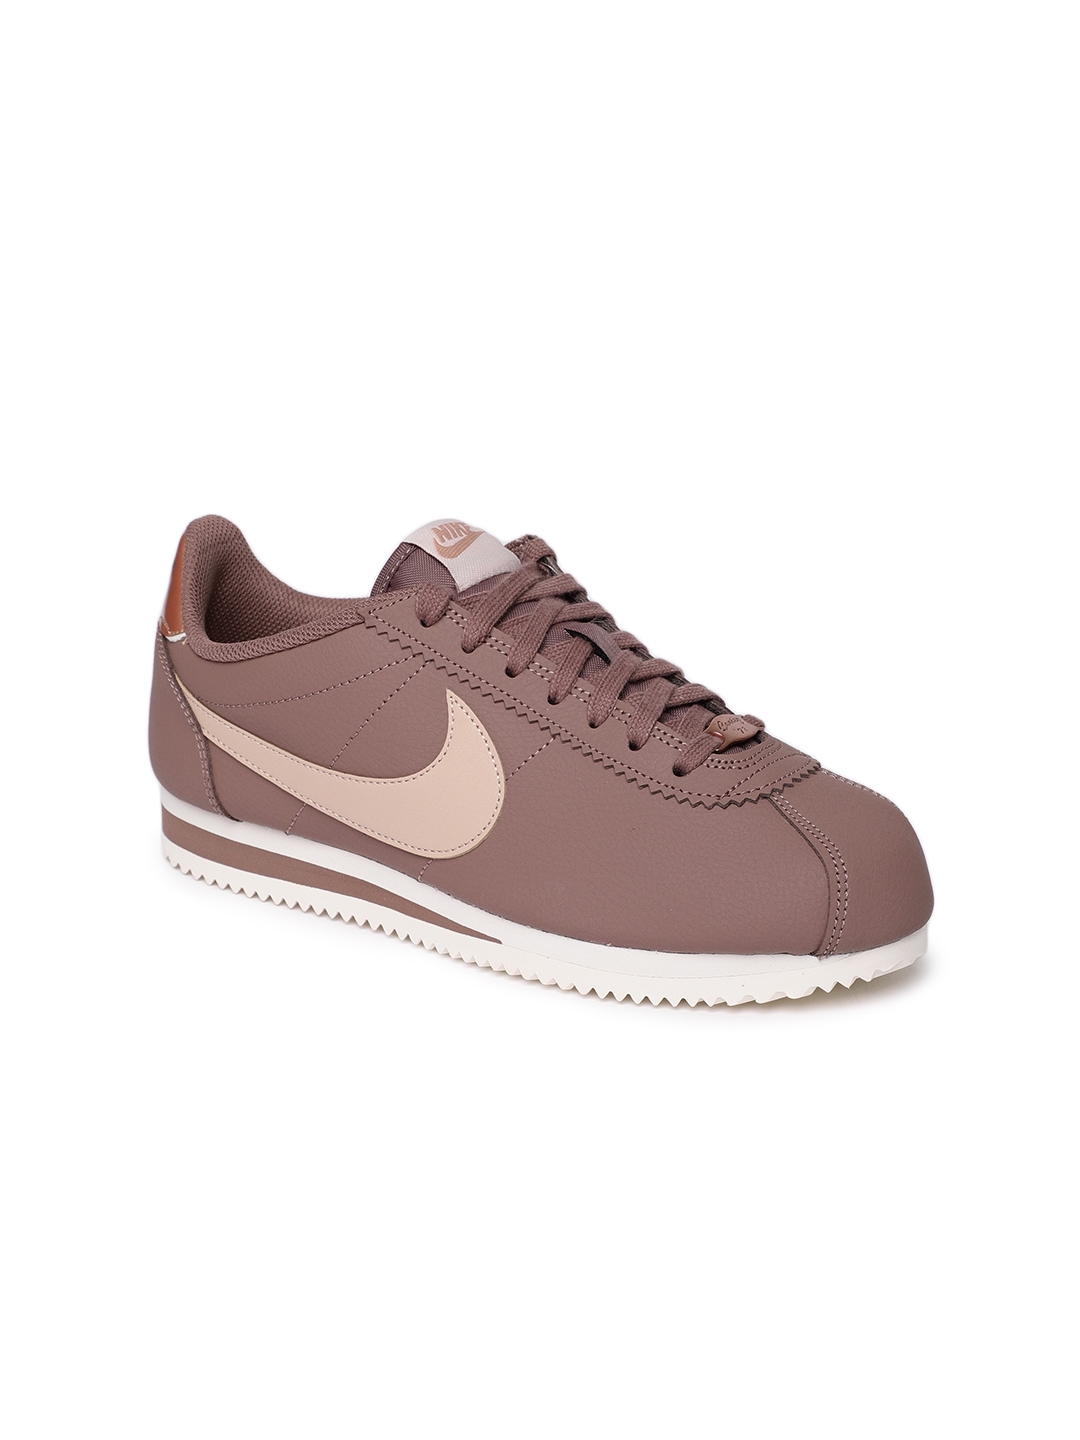 nike brown leather shoes